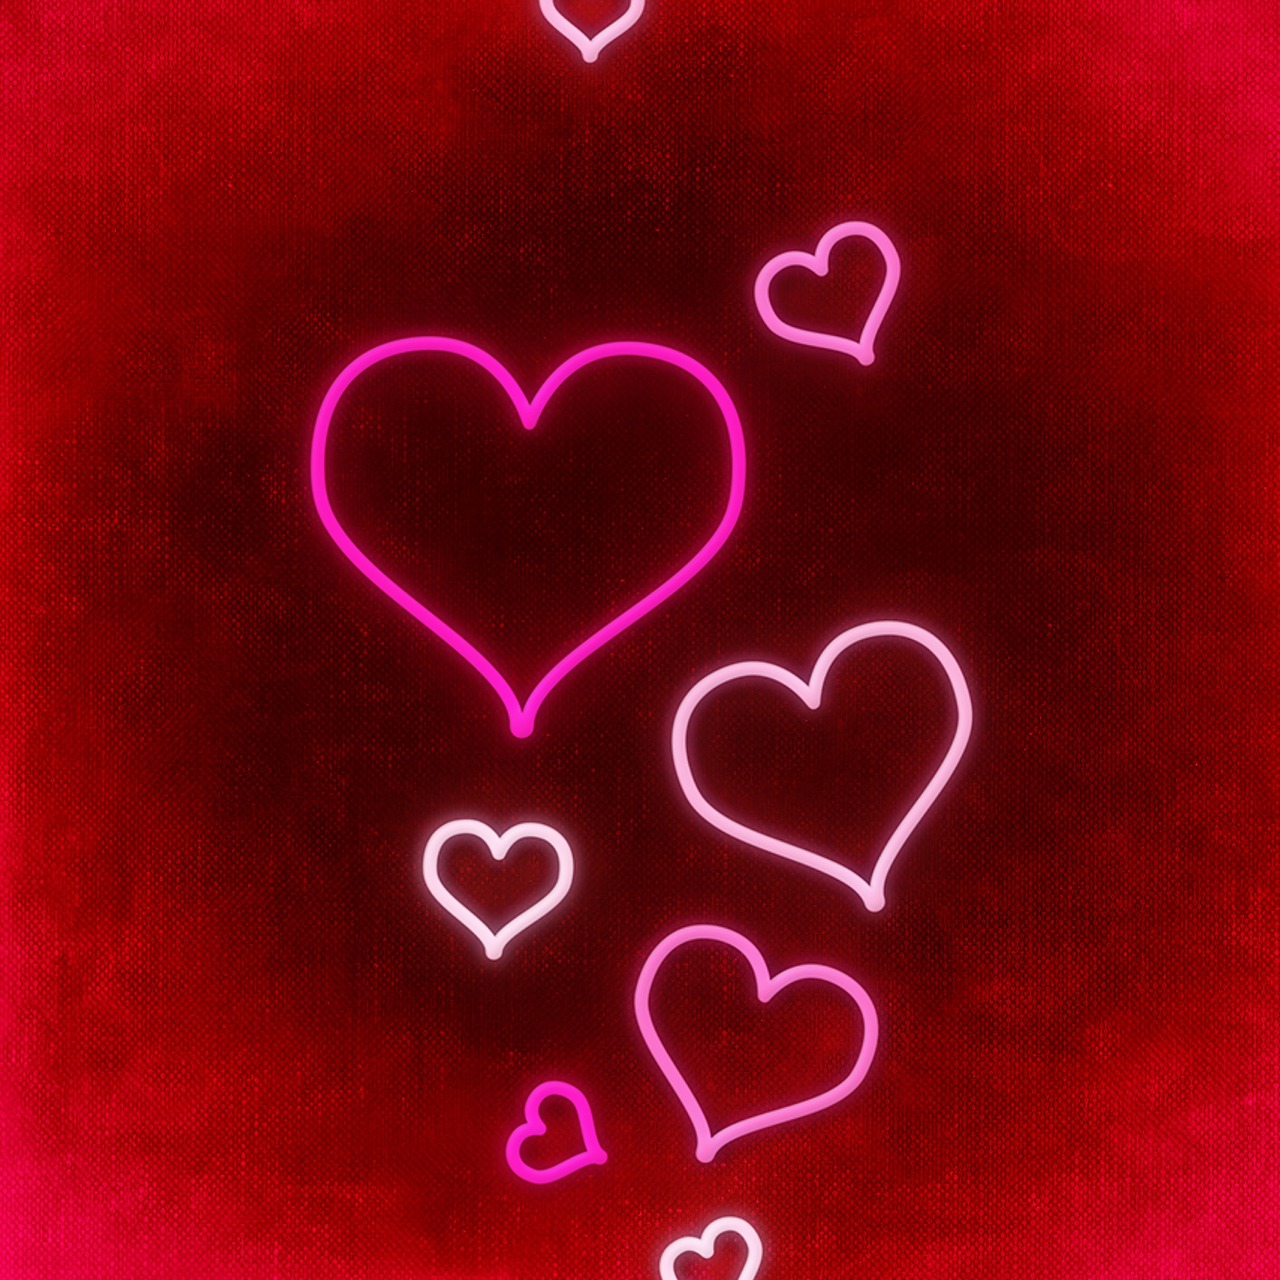 background image red heart free photo